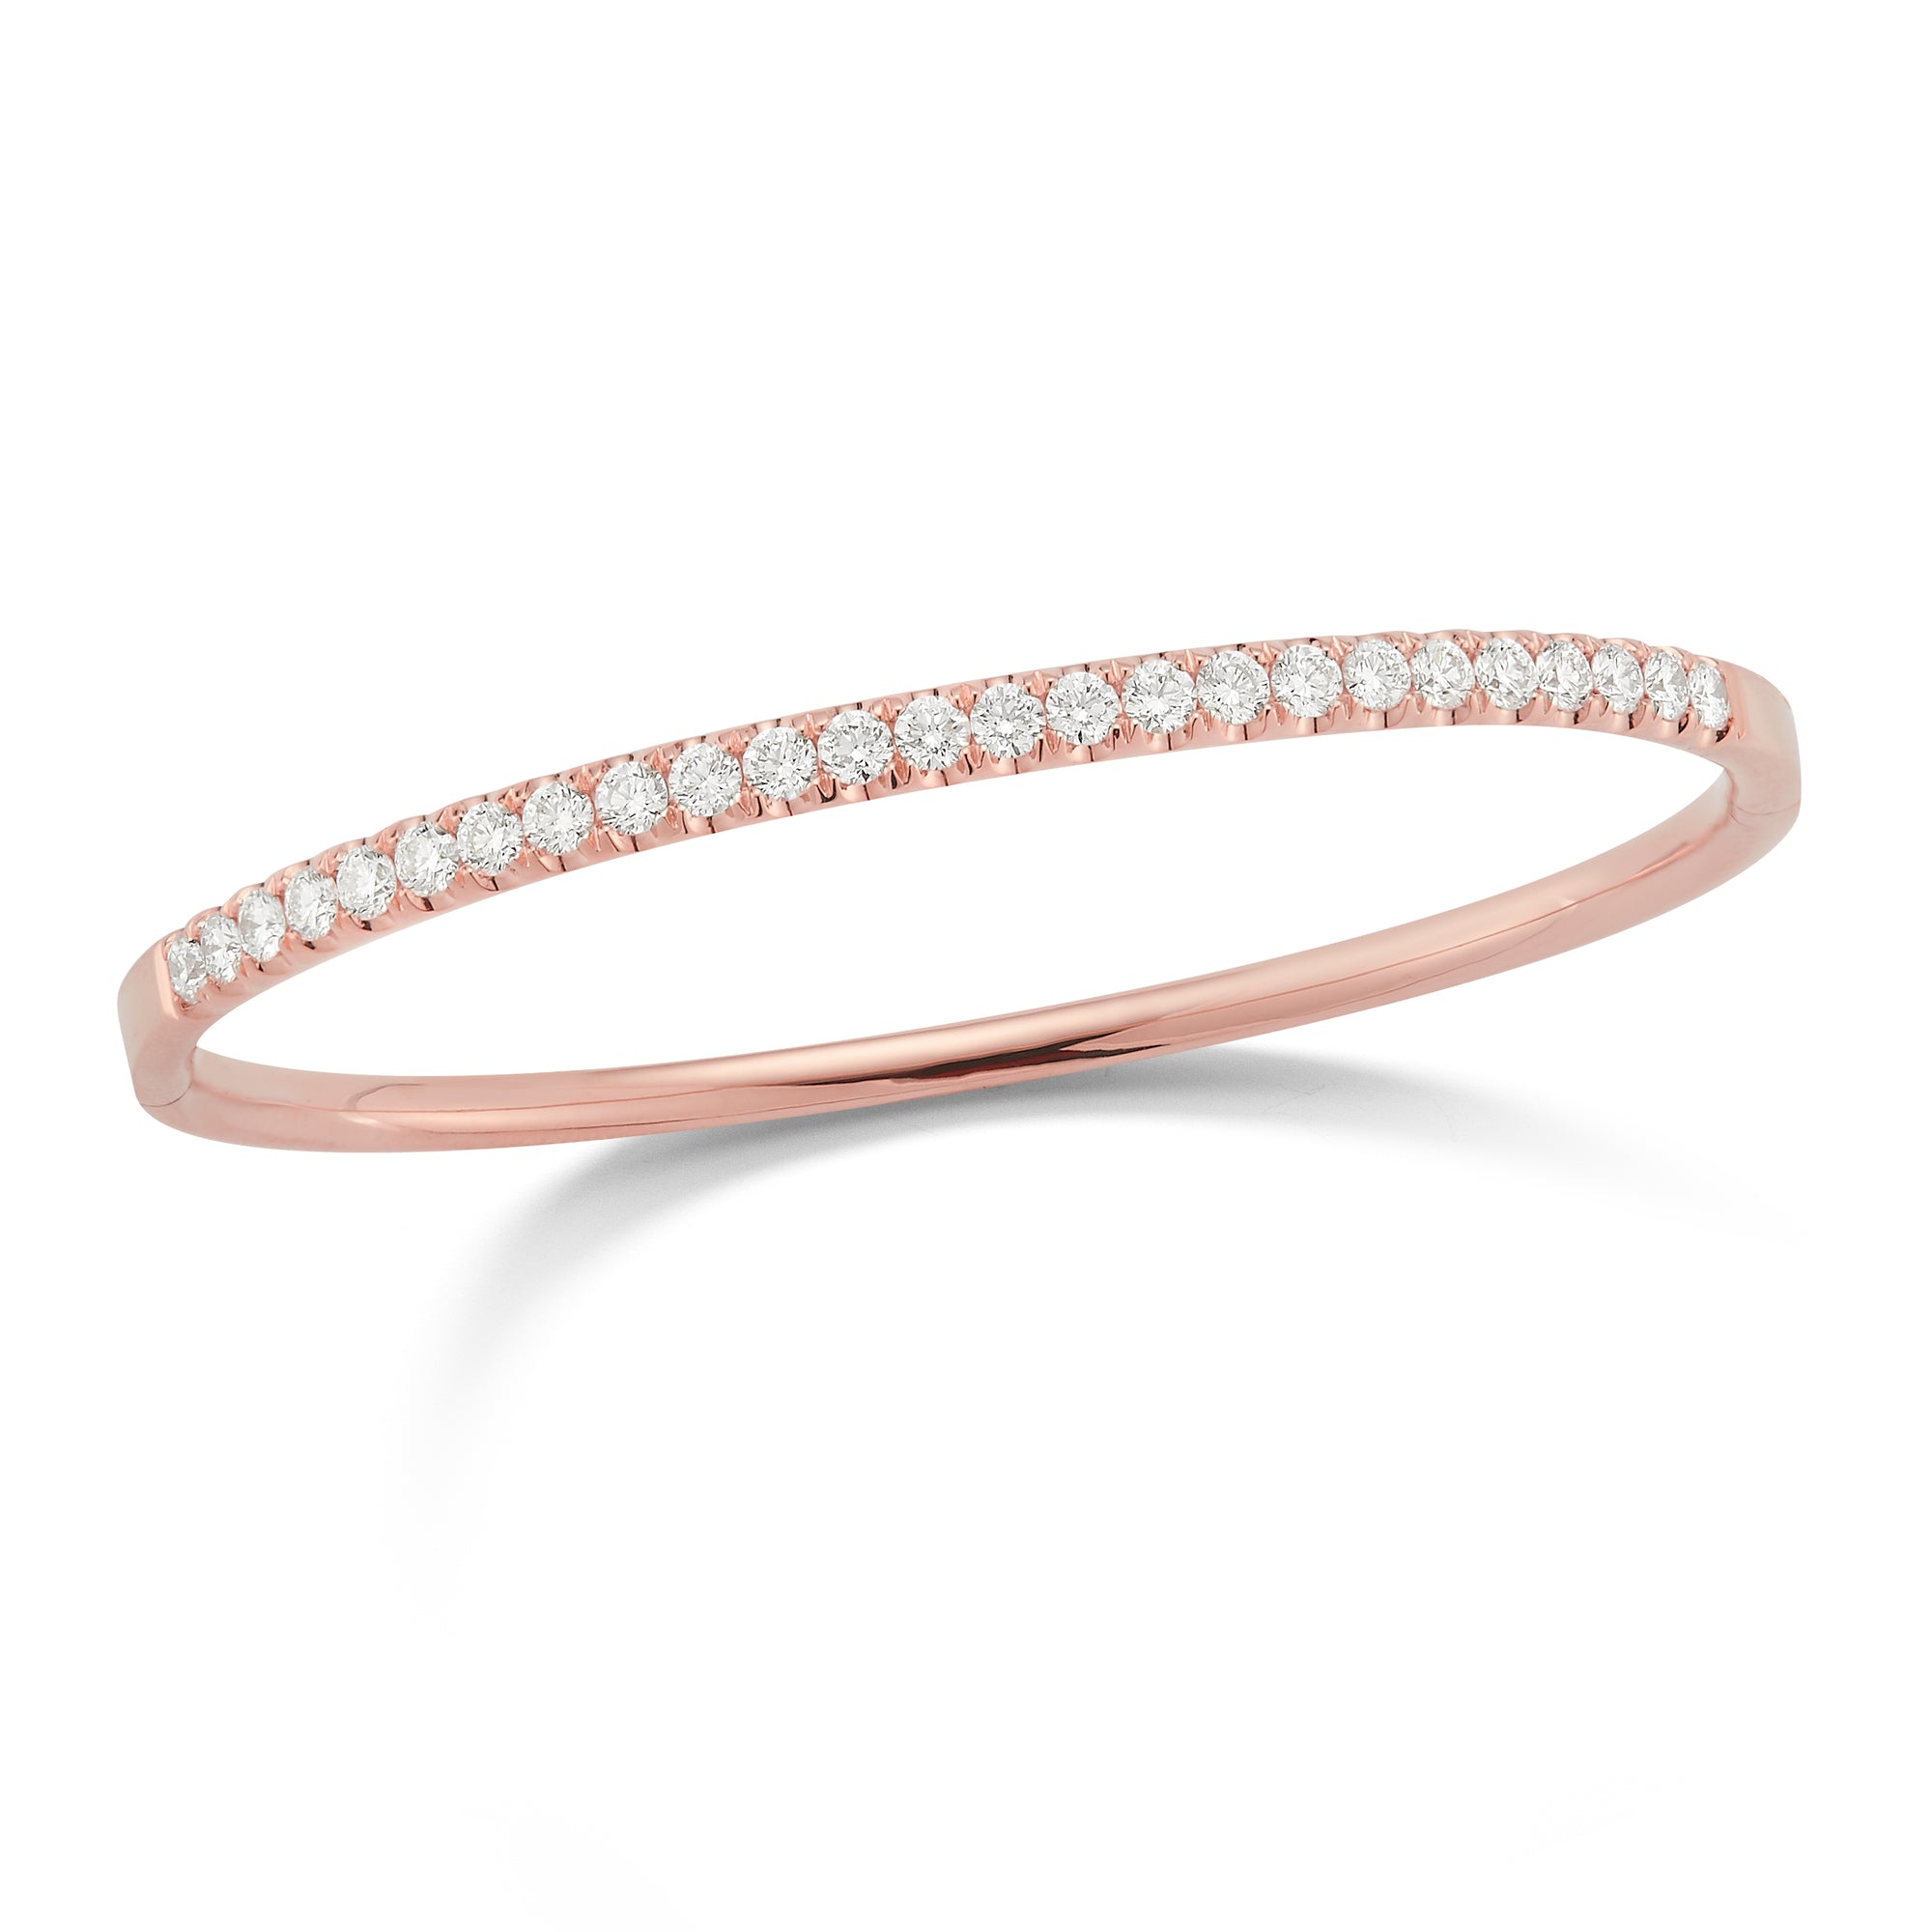 Diamond Wide Classic Bangle Bracelet -18k rose gold weighing 19.07 grams -25 round brilliant-cut pave-set diamonds totaling 2.02 carats.